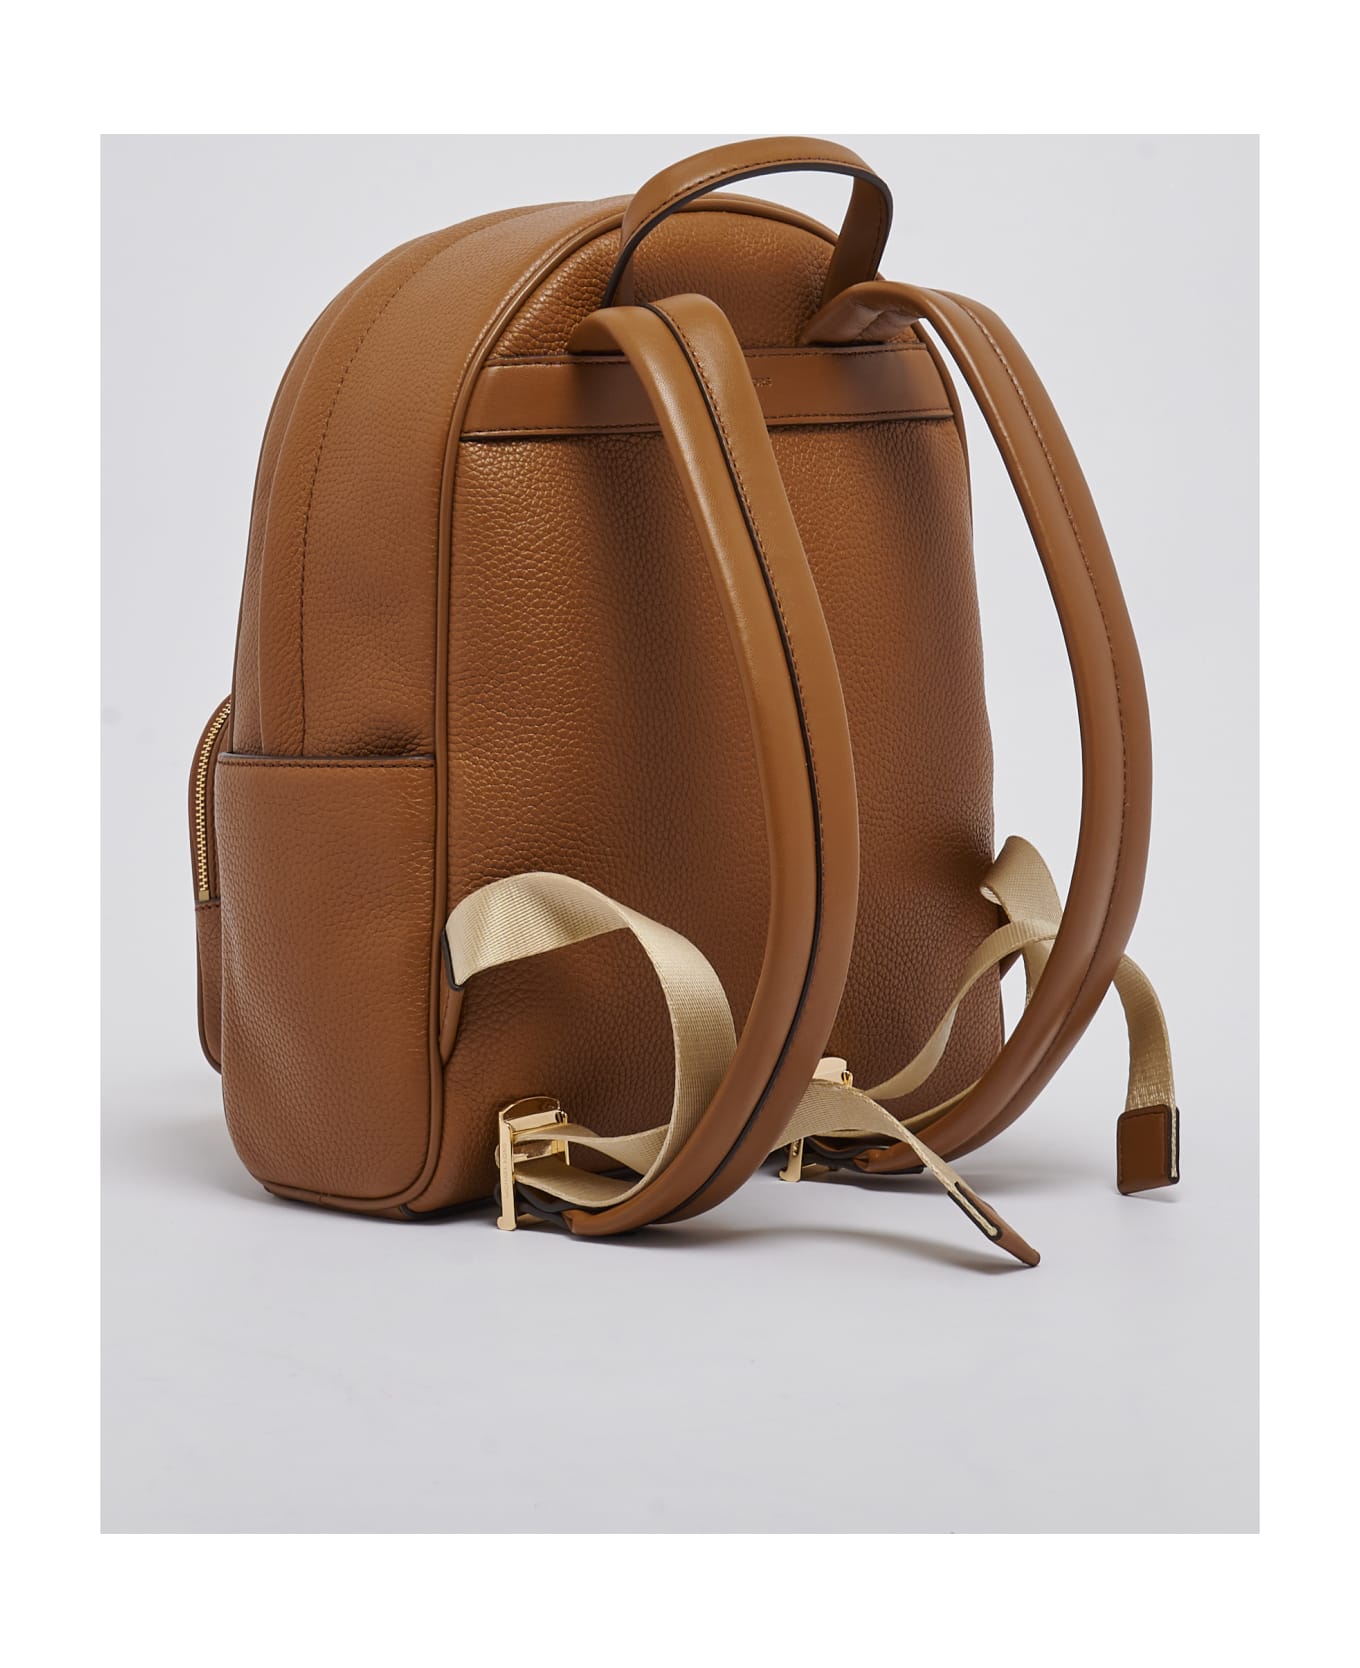 Michael Kors Md Backpack Backpack - CUOIO